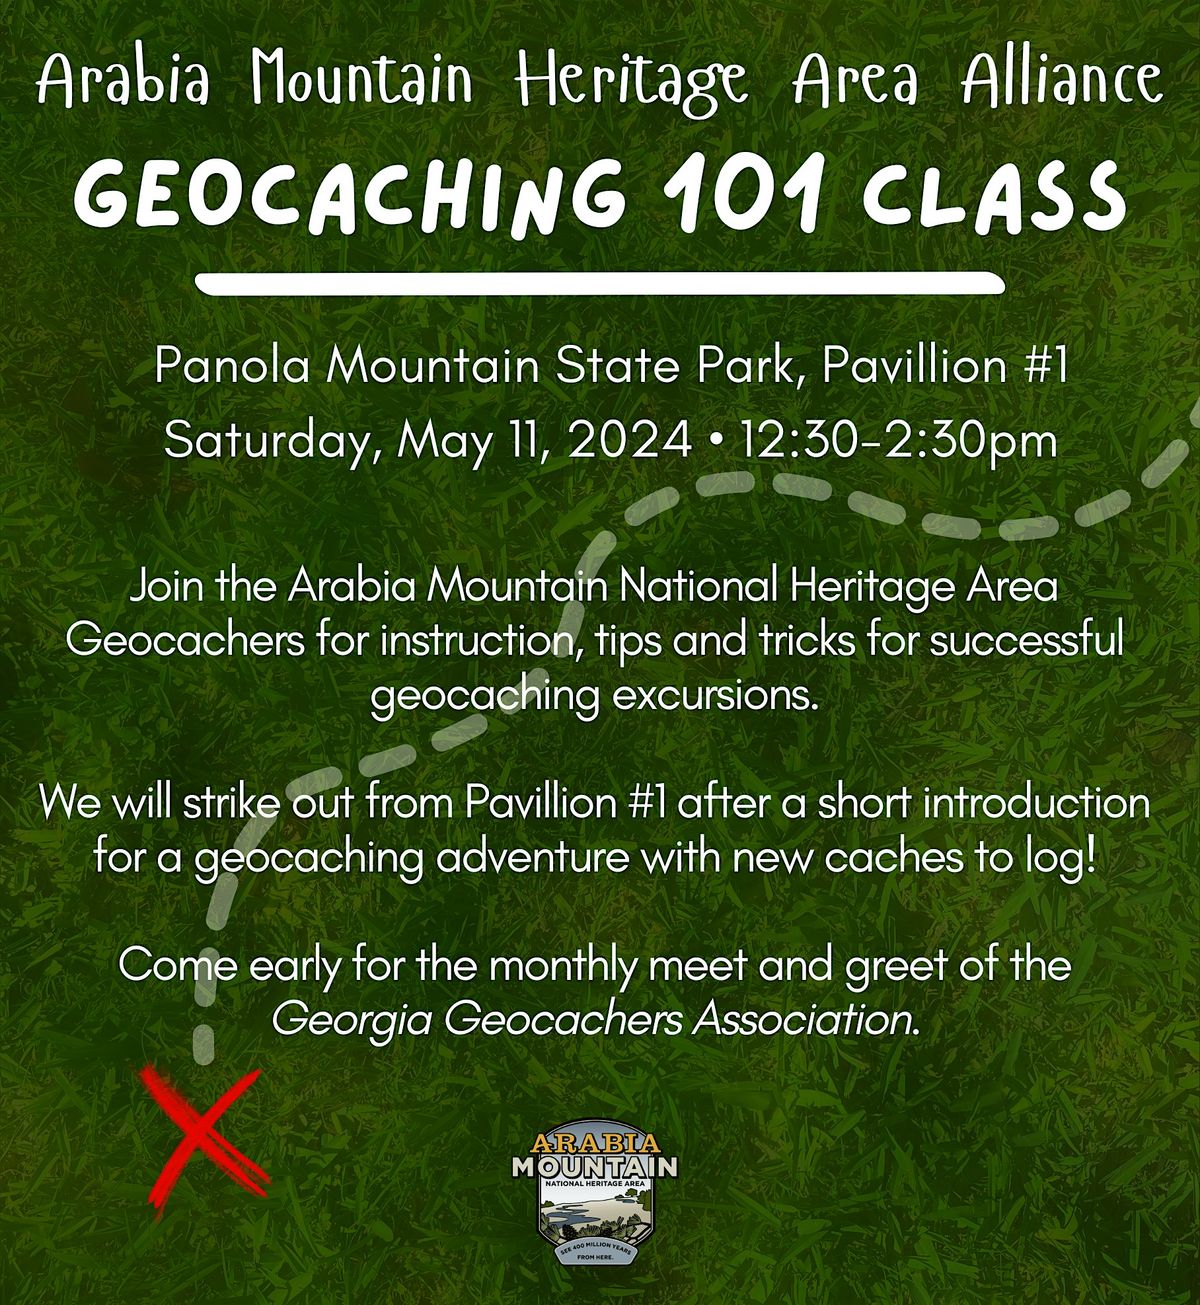 Geocaching 101 with the Arabia Alliance